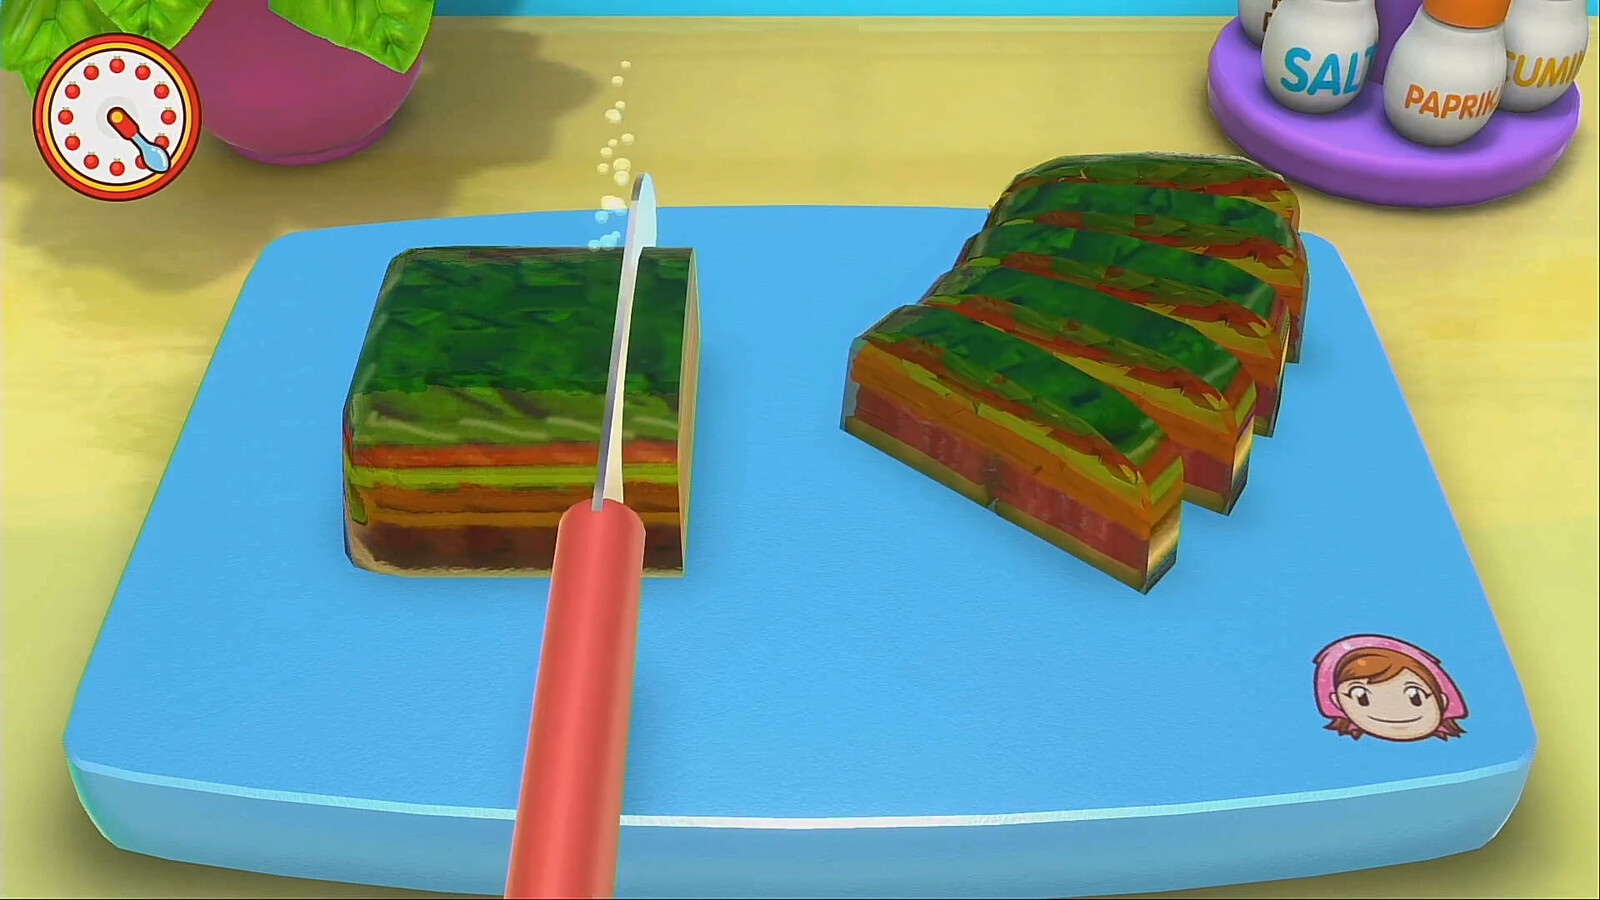 I made this Terrine asset of sliced veggies suspended in gelatin, including the interiors. This includes models, textures, and materials. Seen in the slicing minigame and later in the final presentation.